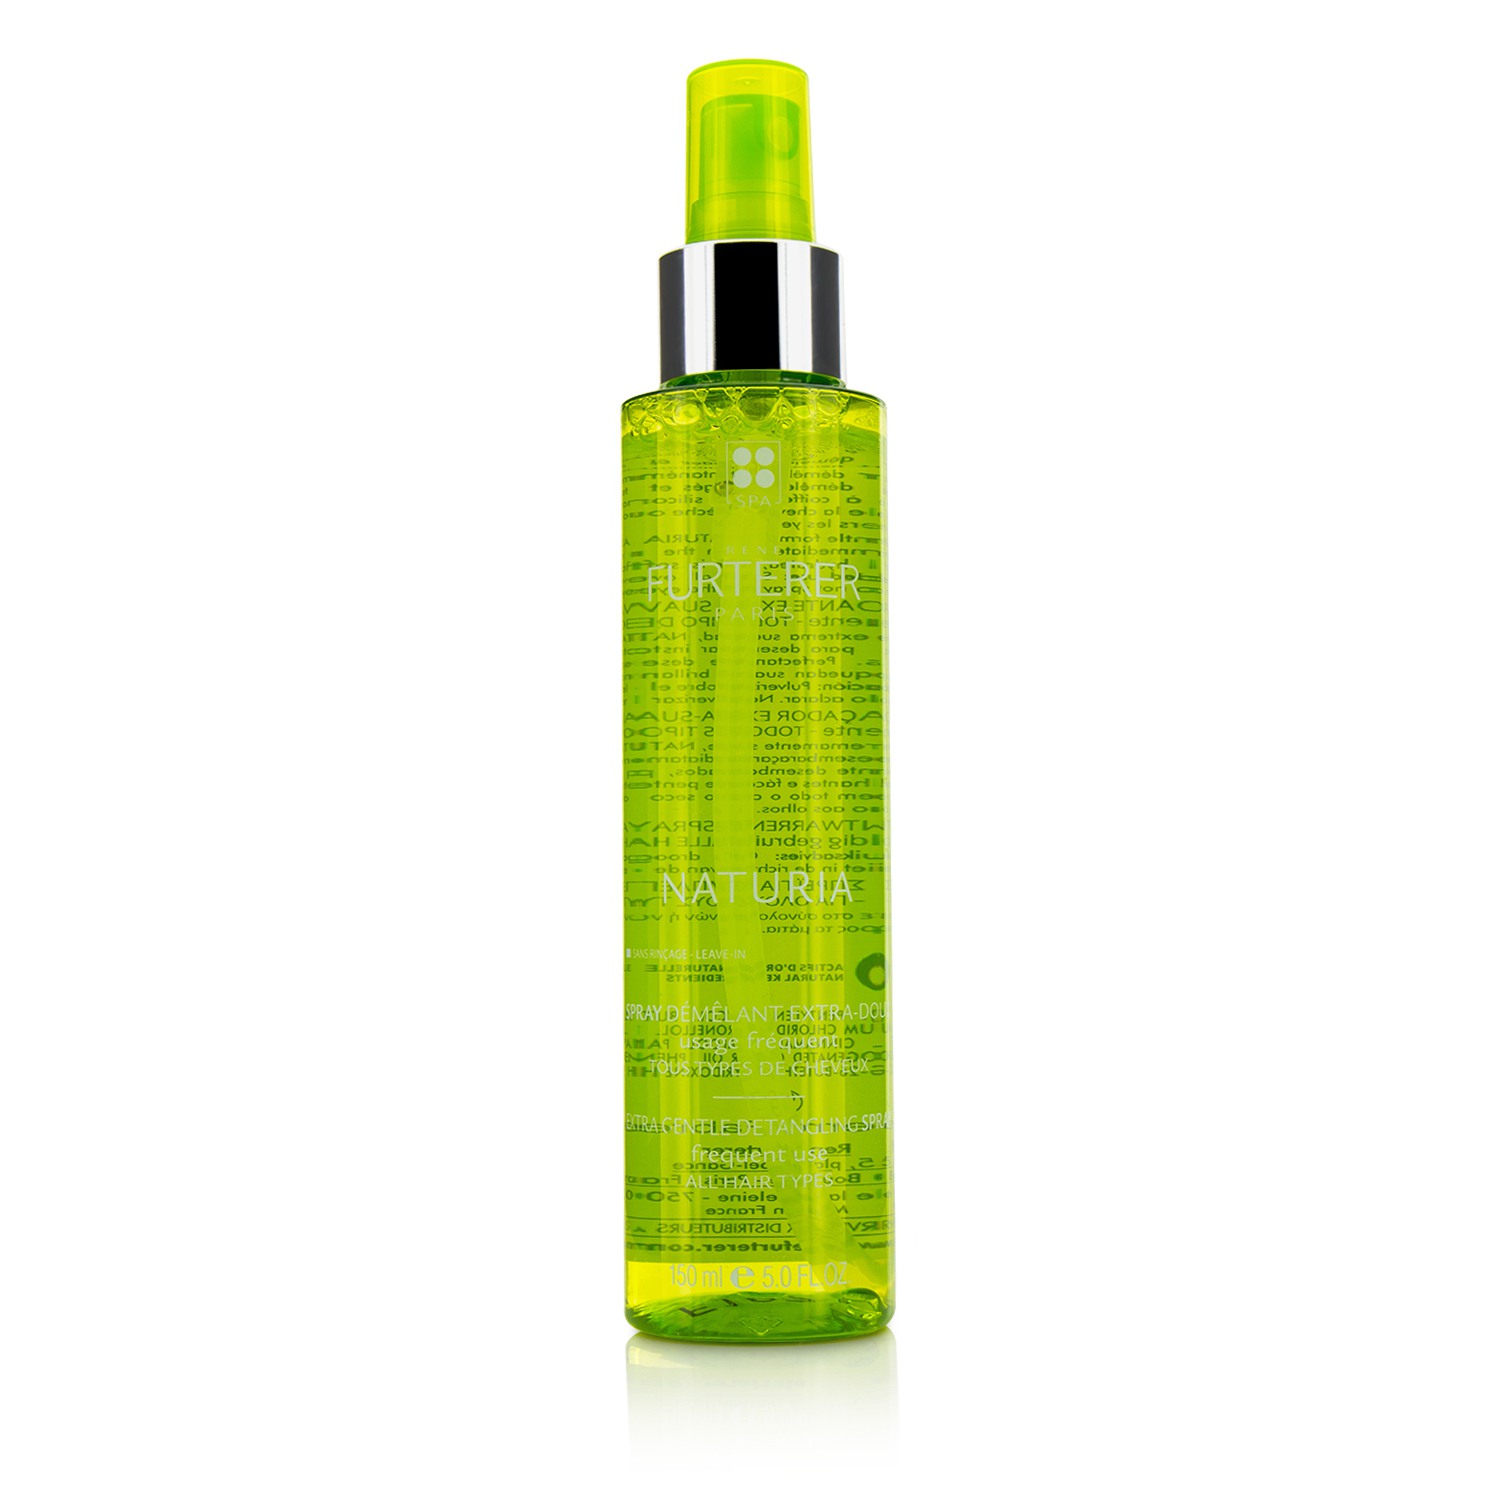 Naturia Extra Gentle Detangling Spray - Frequent Use (All Hair Types) Rene Furterer Image